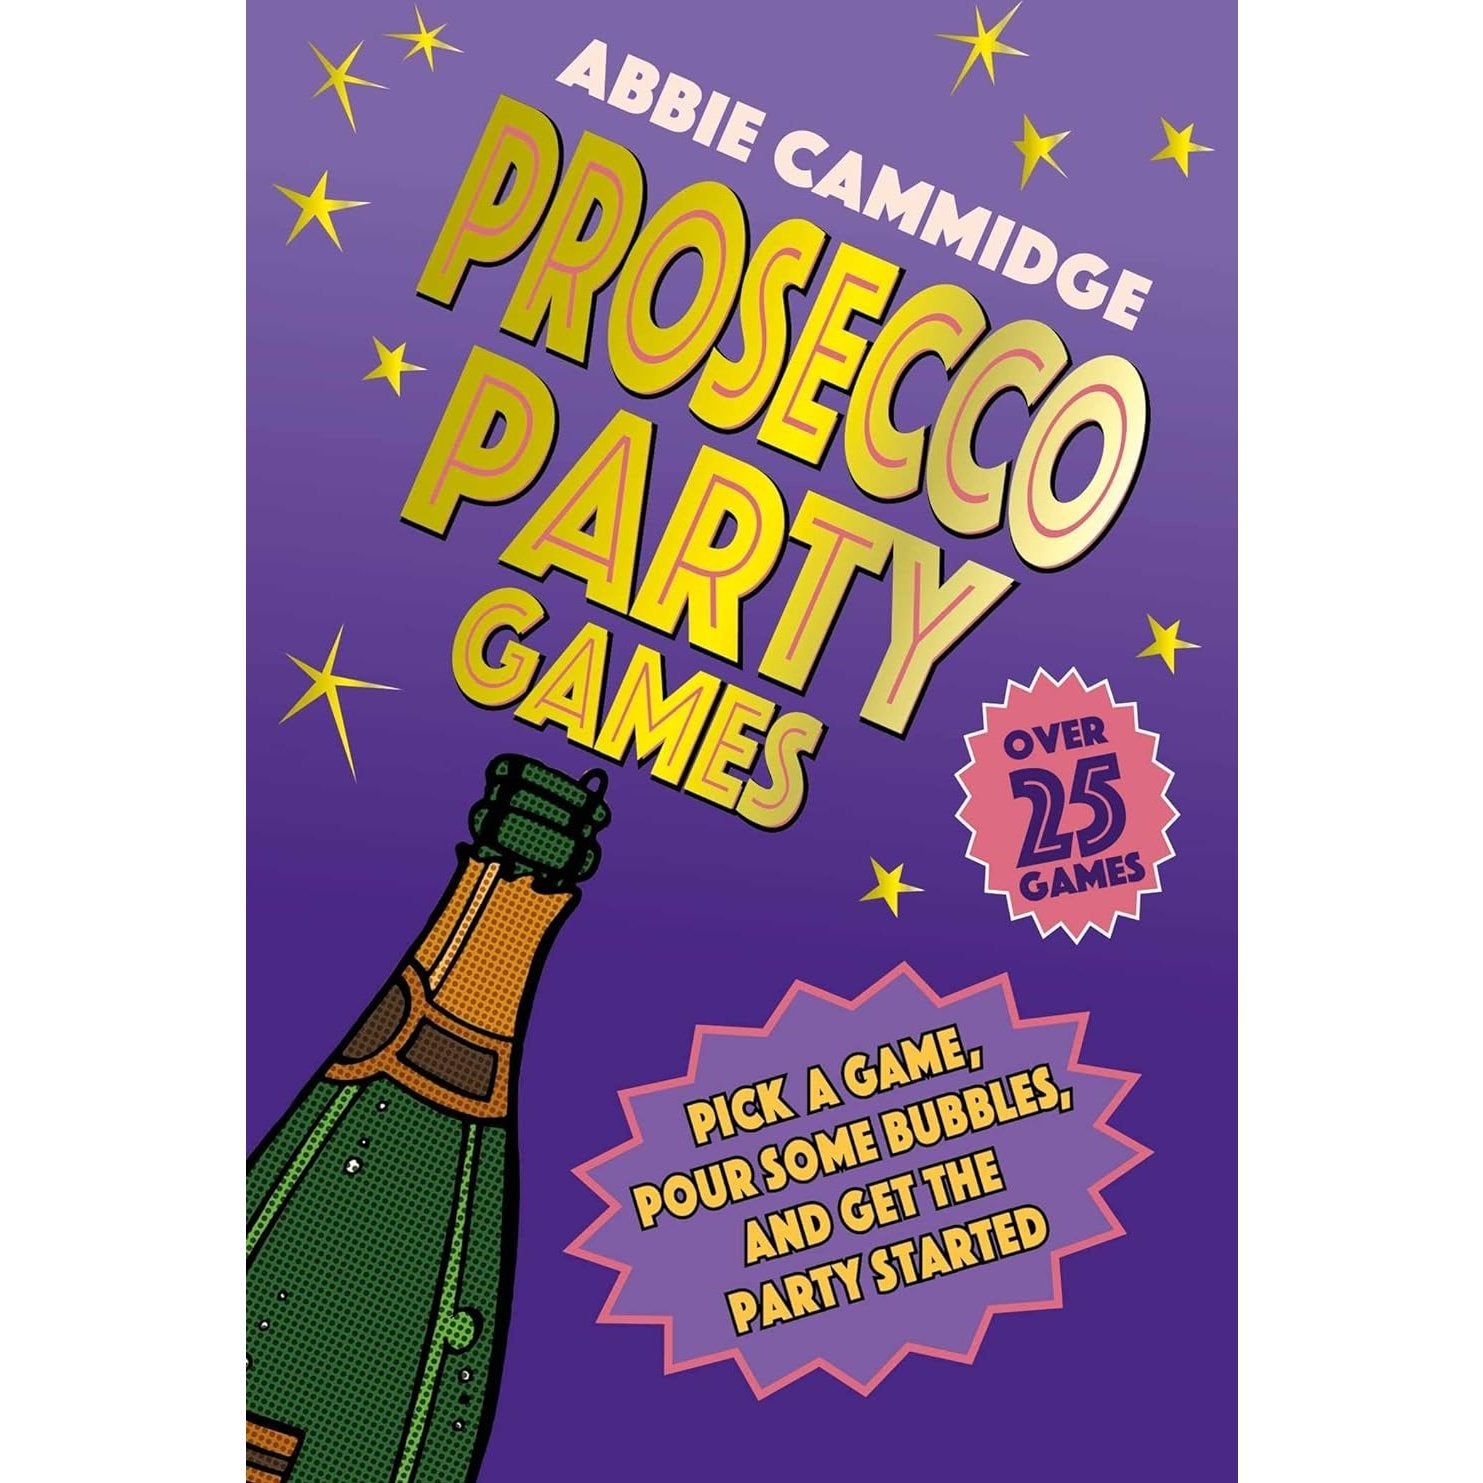 Prosecco Party Games - Hardcover Book